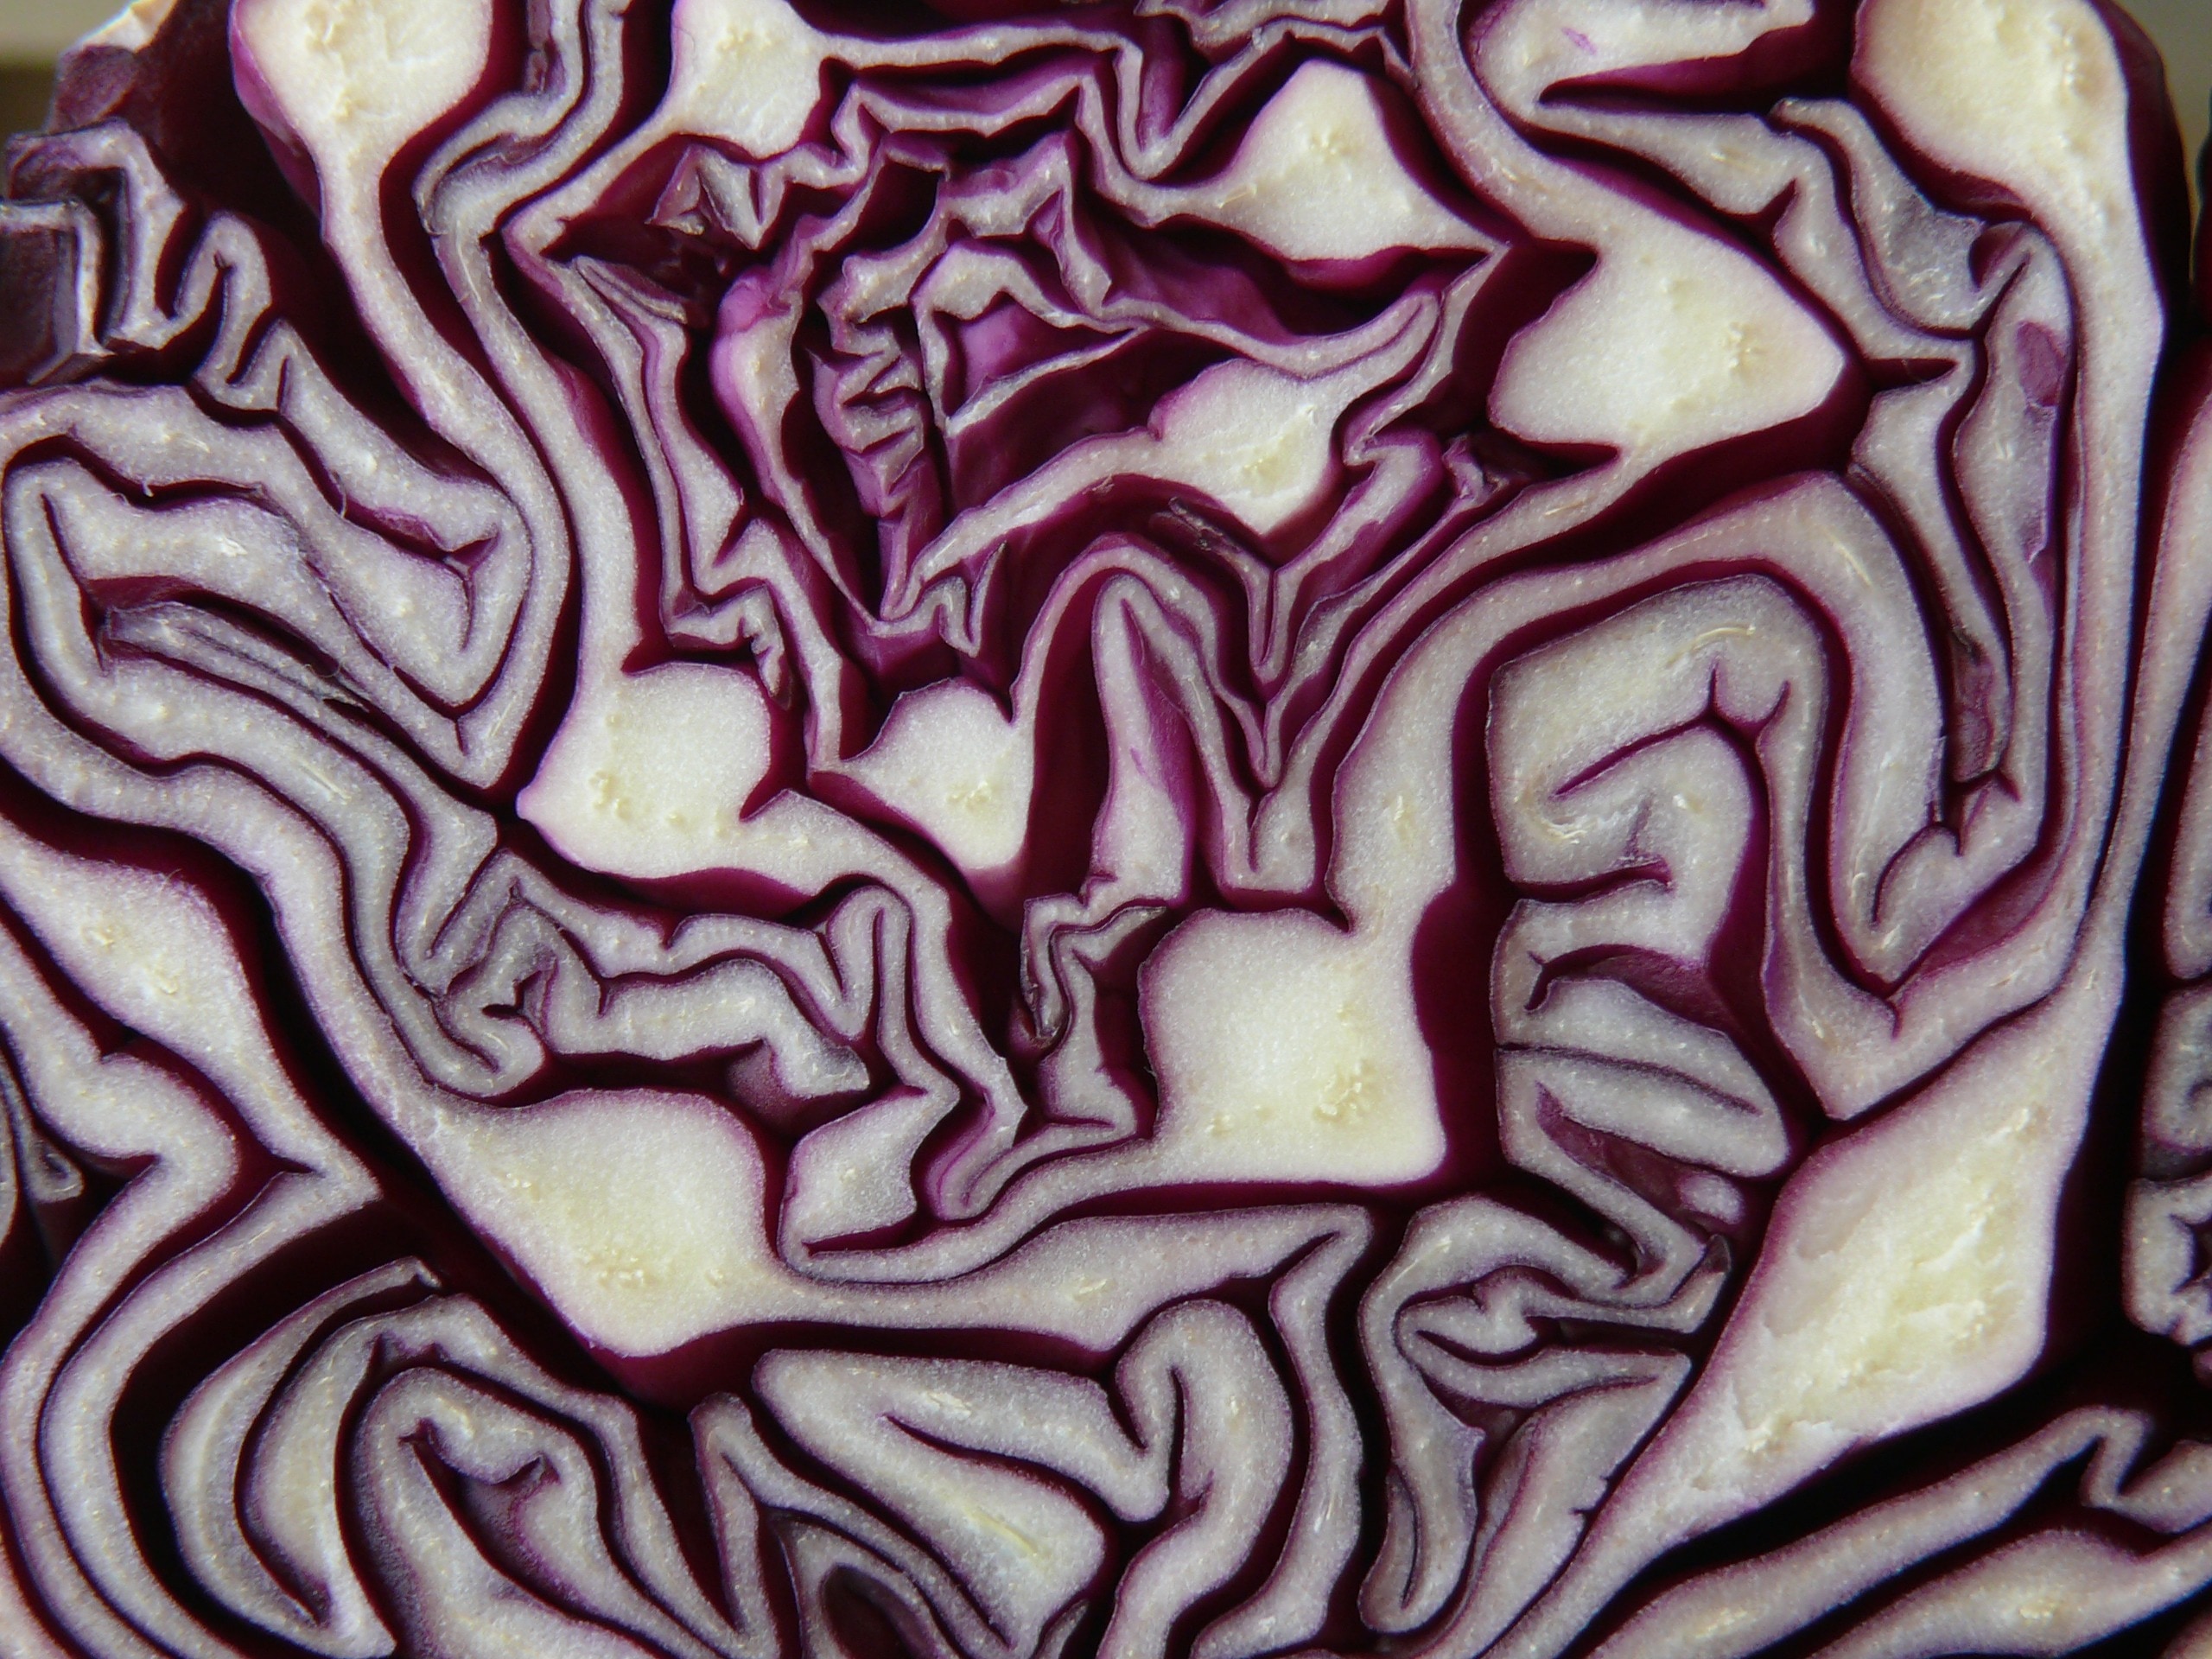 purple cabbage sliced in the middle